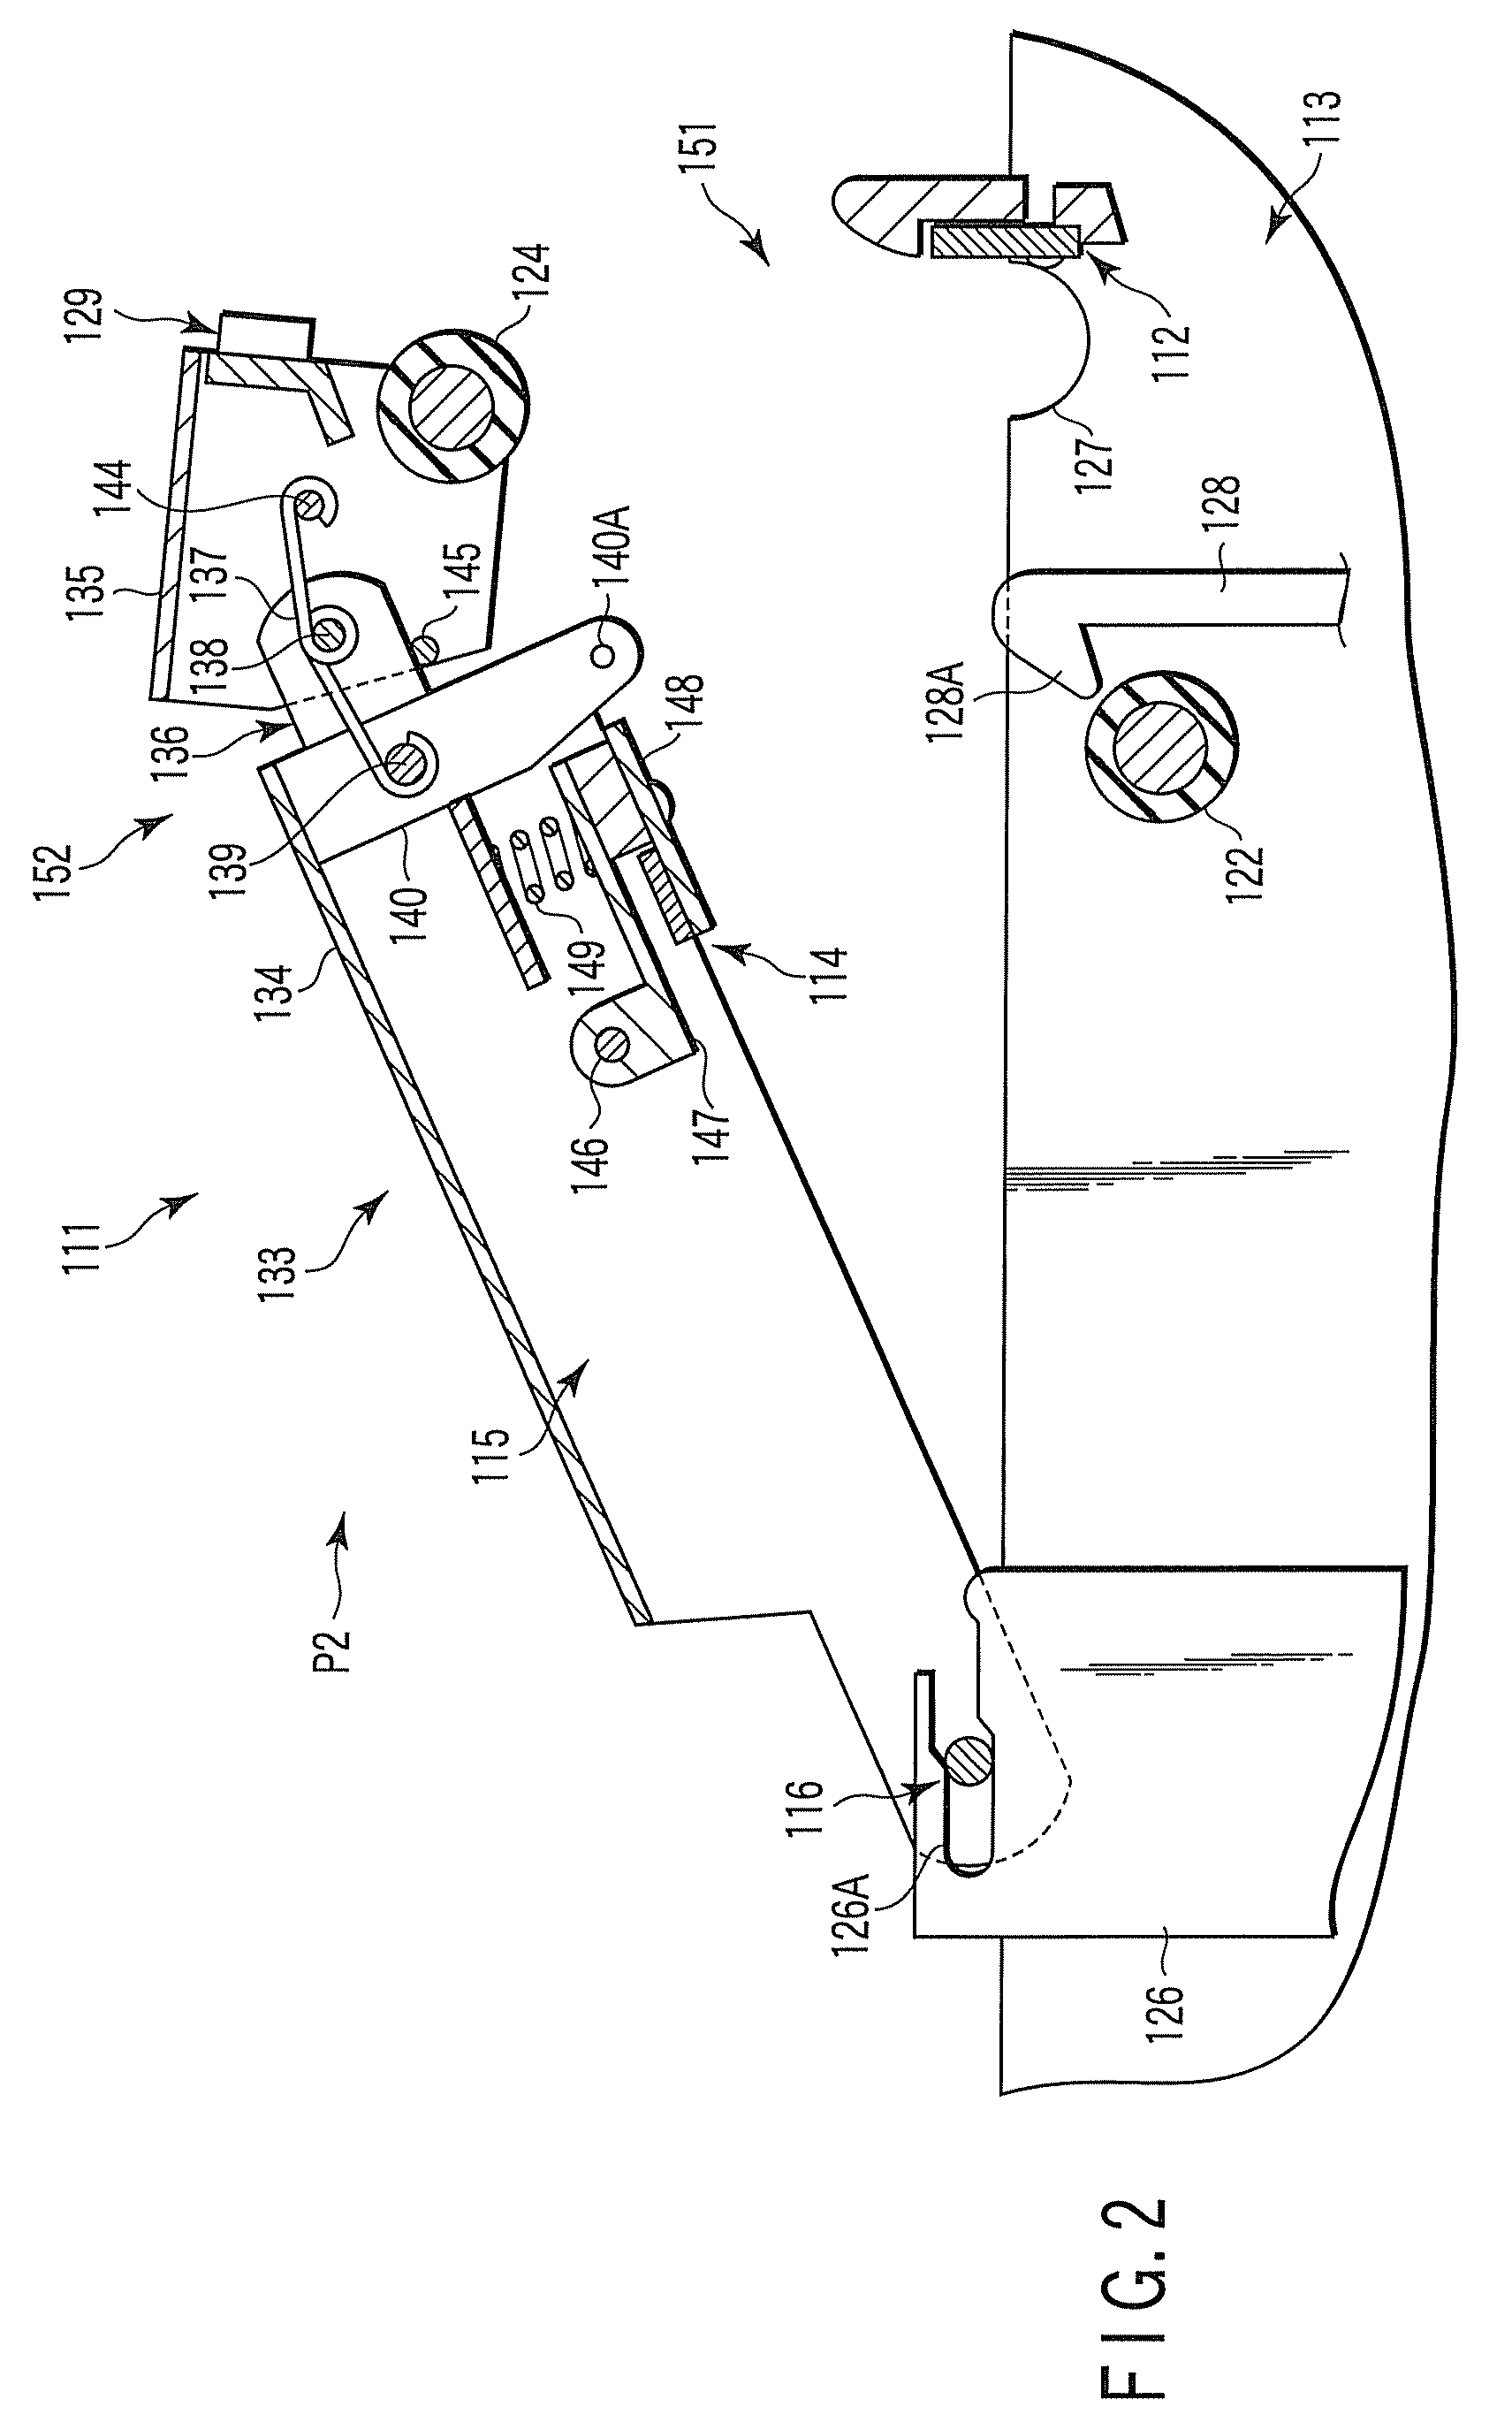 Printing apparatus including a cover holding a thermal head and a platen roller on a hinged frame